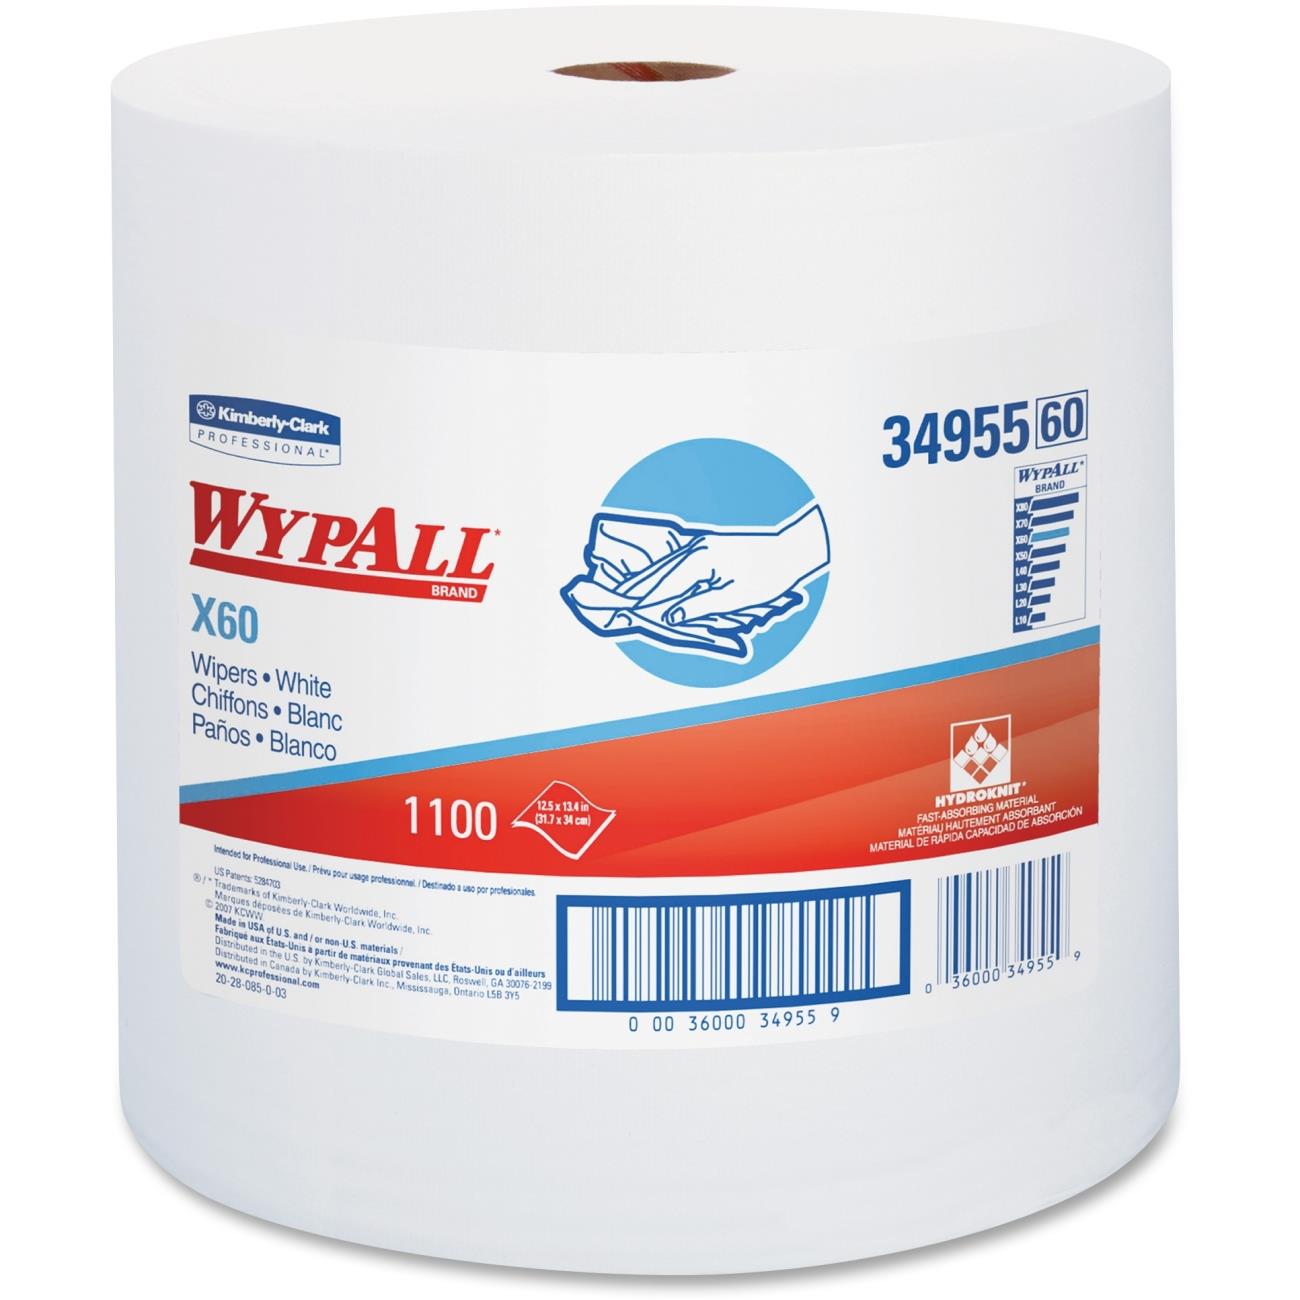 WYPALL X60 JUMBO ROLL WHITE 1100 WIPERS - Cleaning & Janitorial